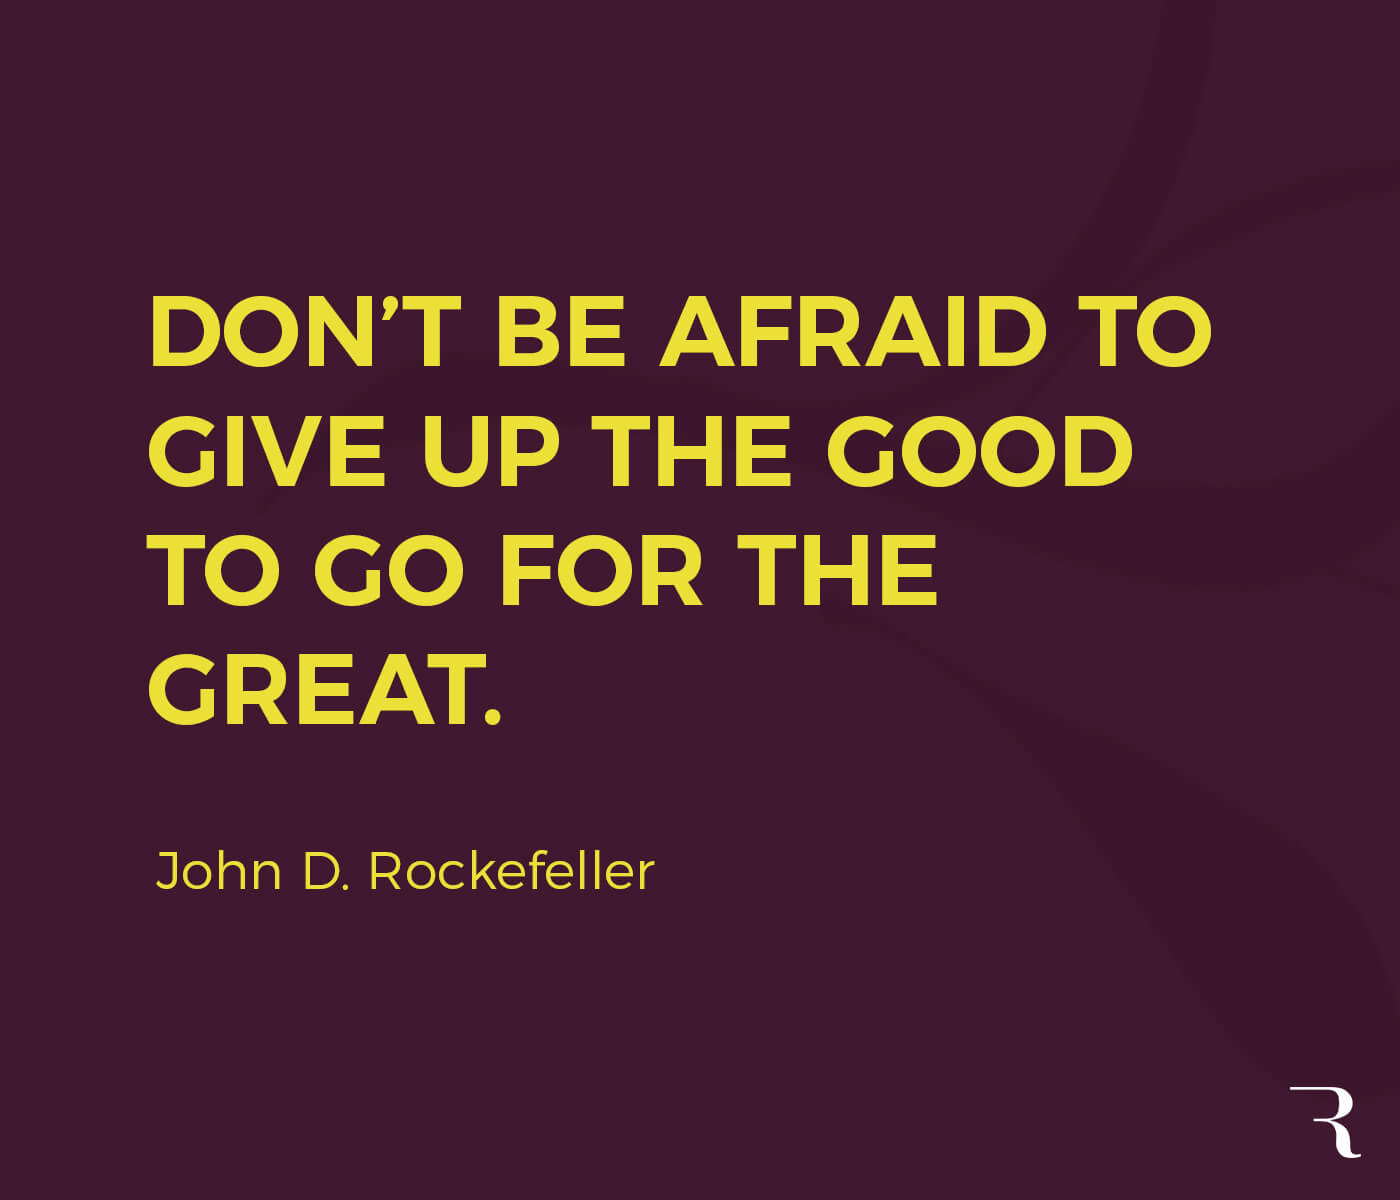 Motivational Quotes: "Don't be afraid to give up the good to go for the great." 112 Motivational Quotes to Be a Better Entrepreneur